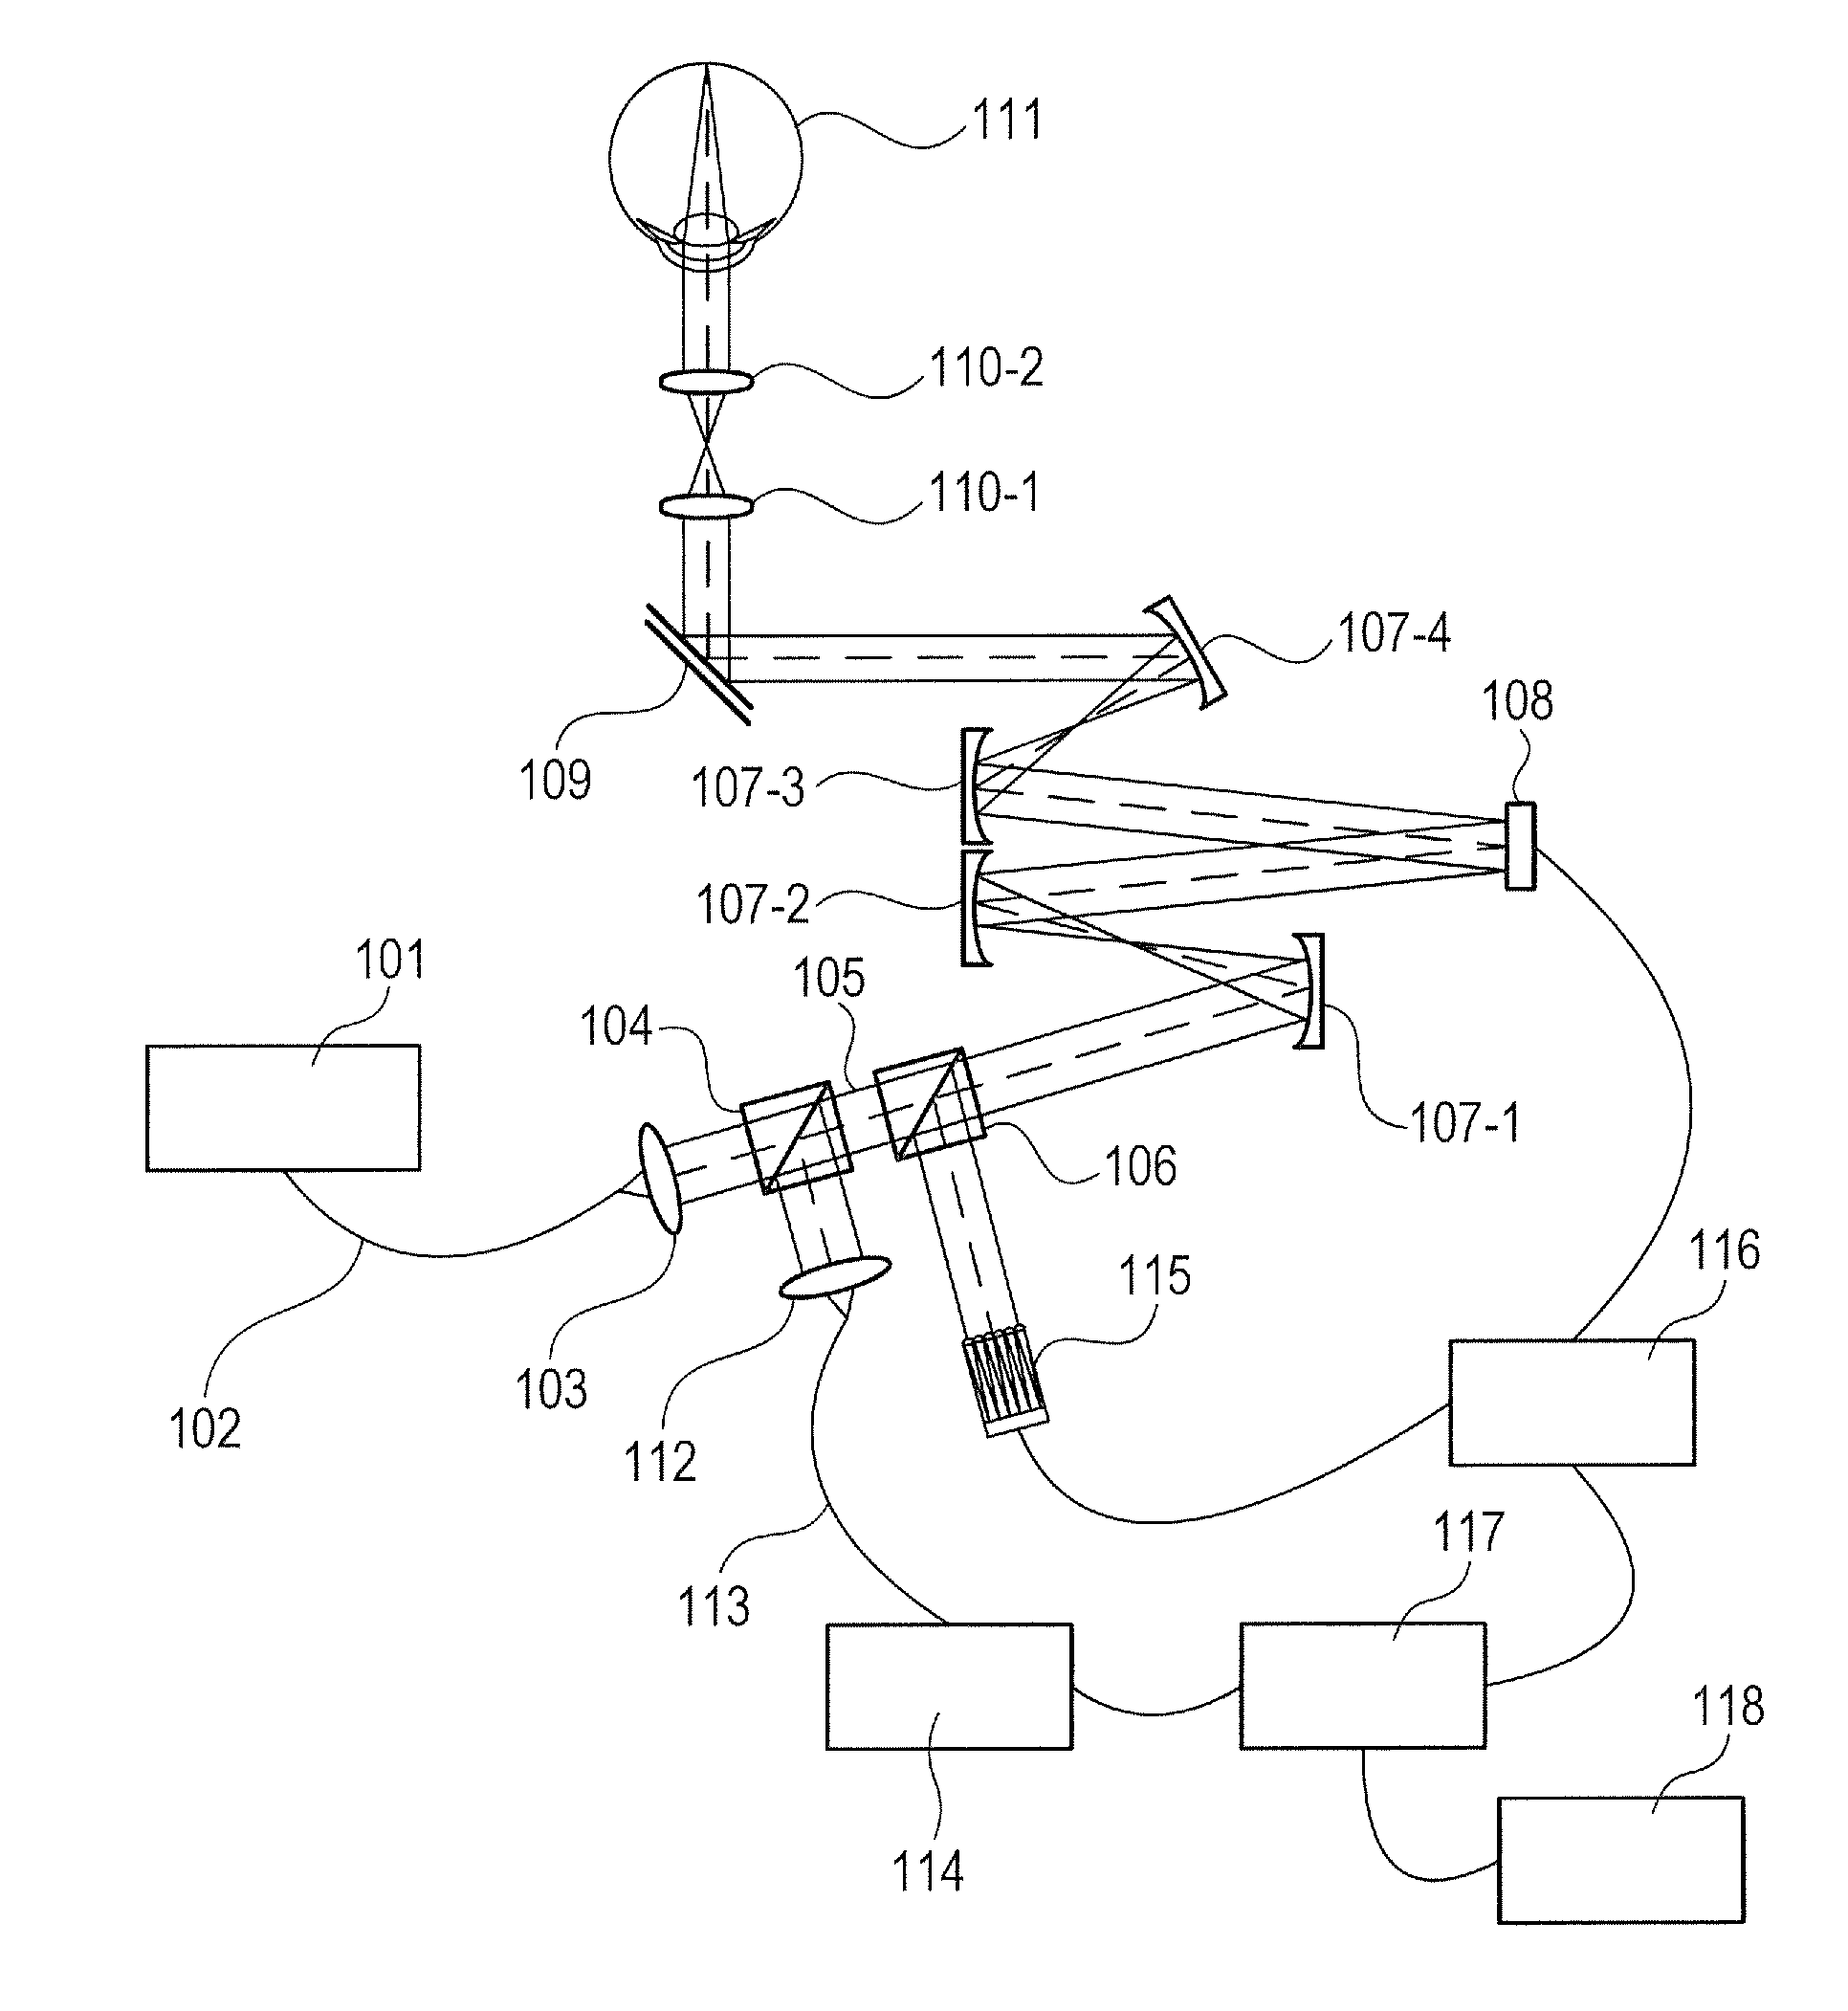 Deformable mirror system, control method therefor, and ophthalmic apparatus